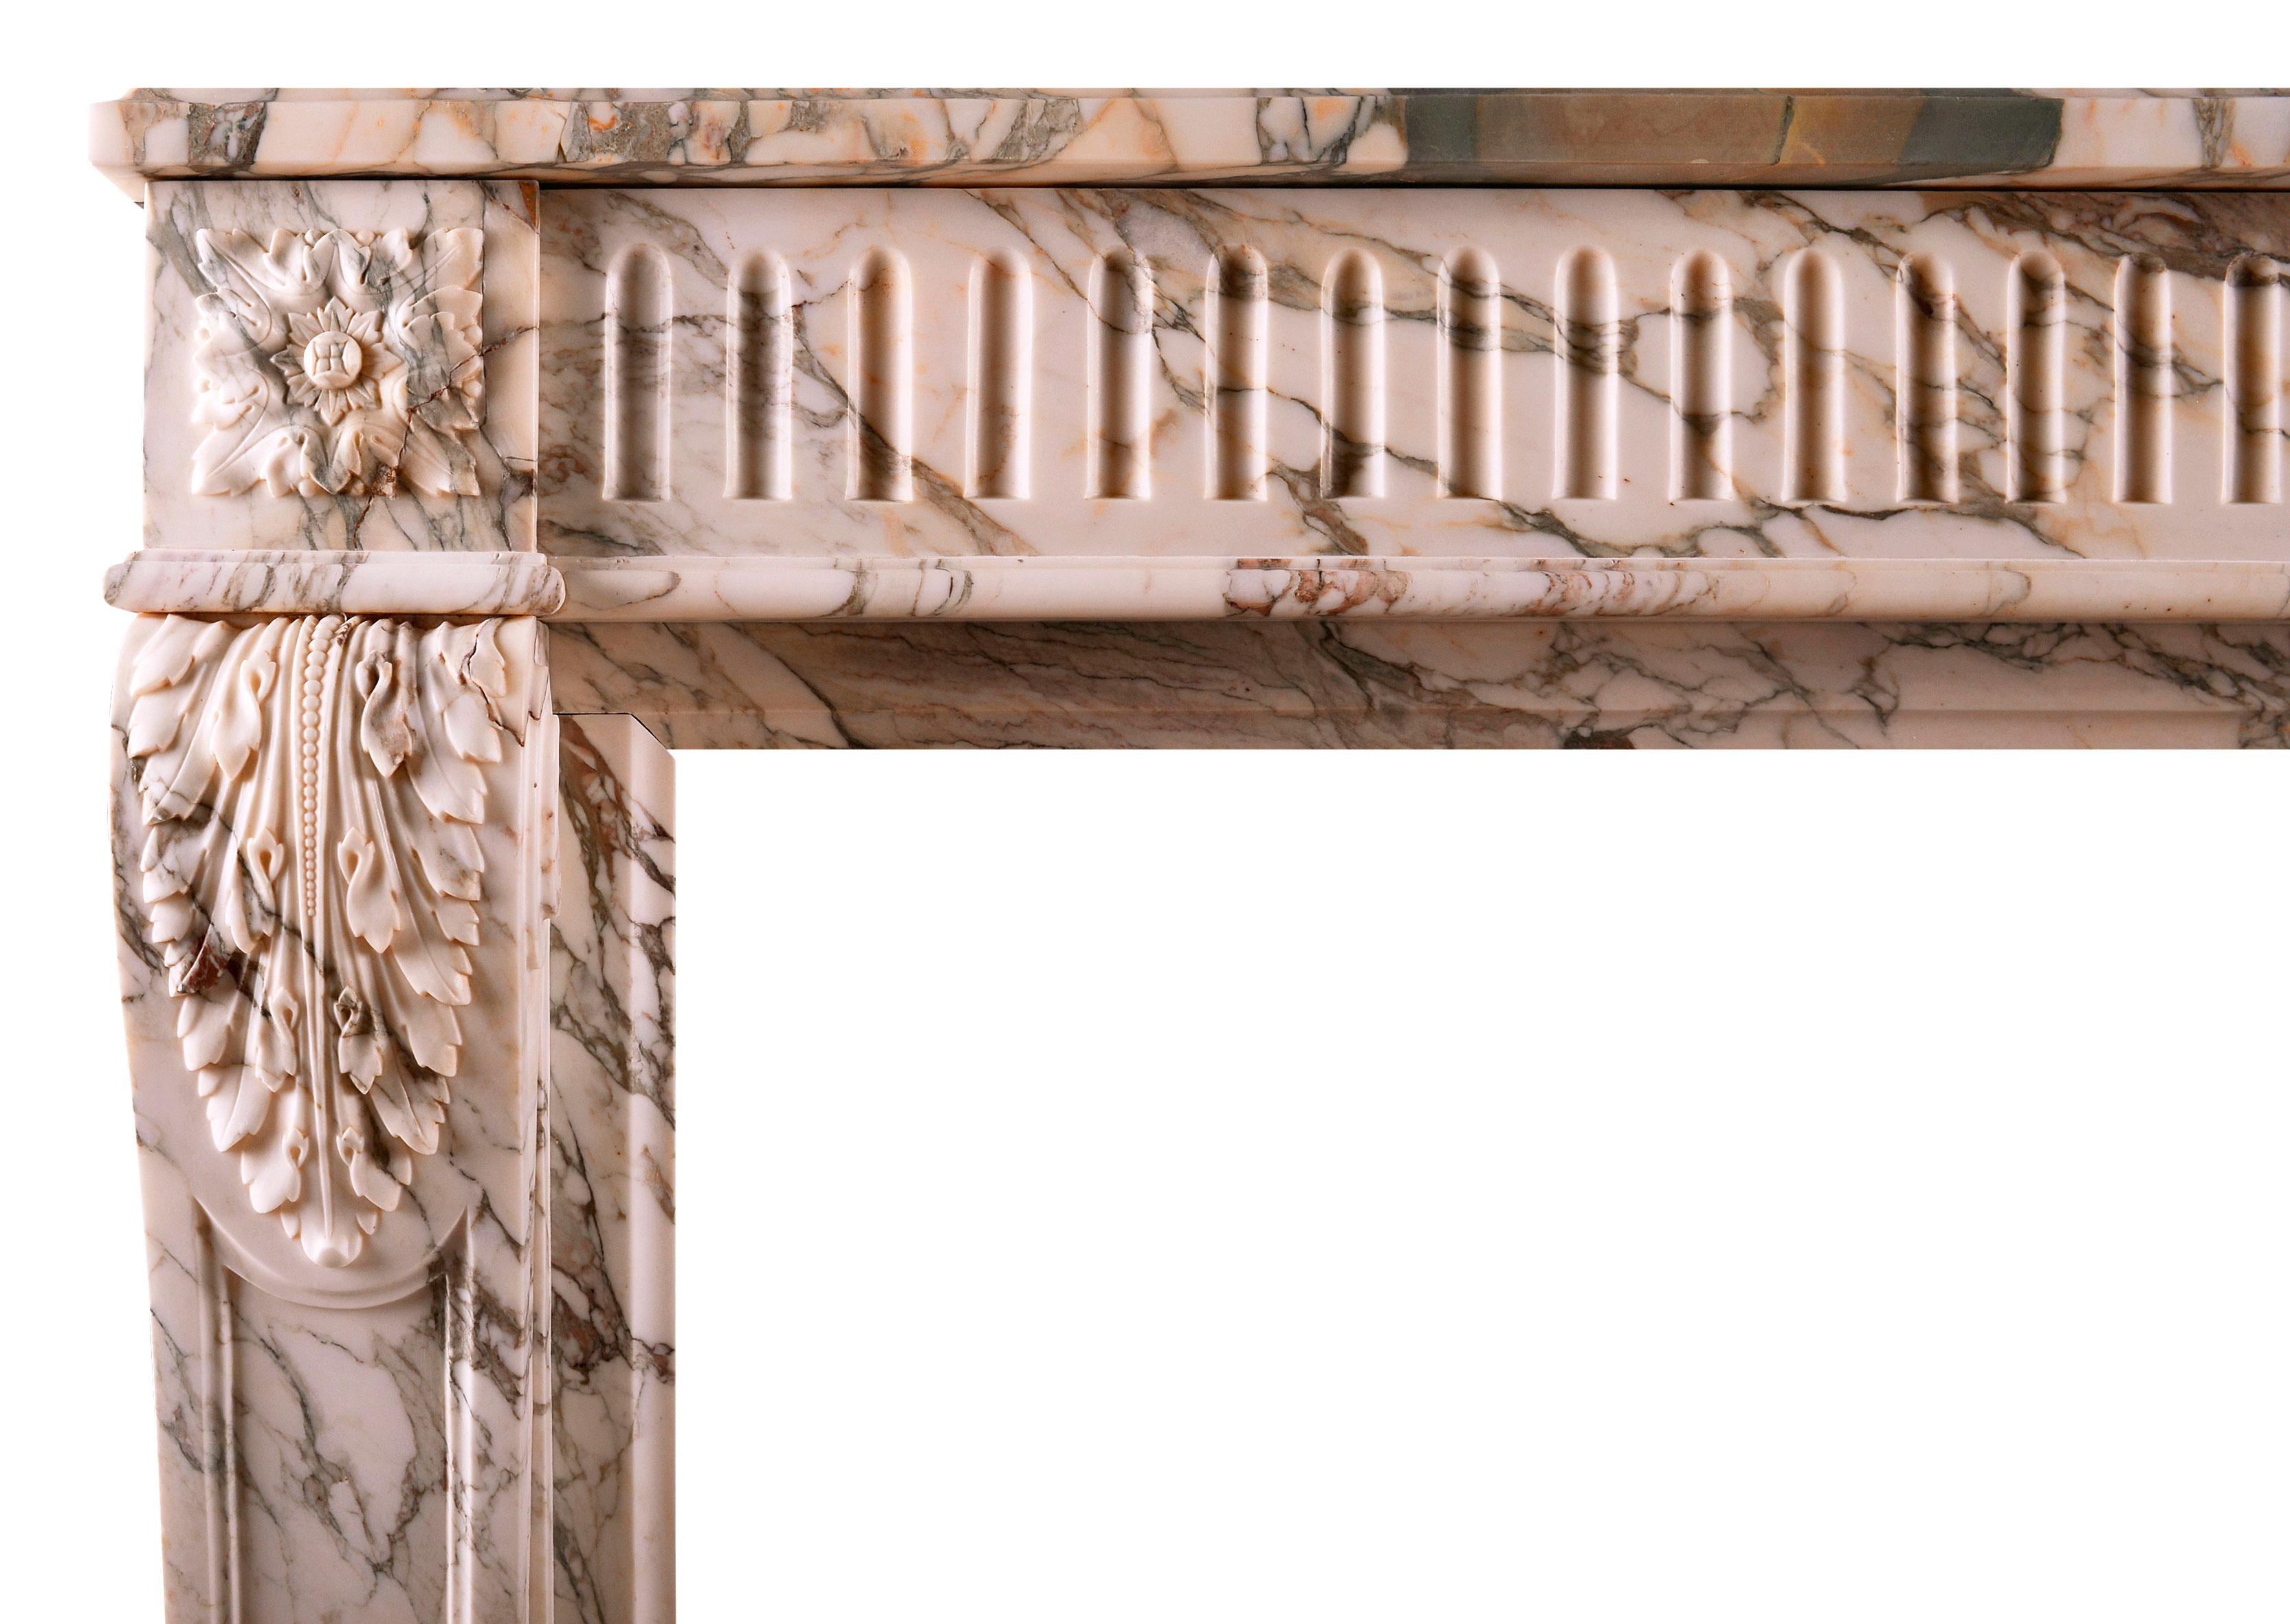 A fine quality French Louis XVI marble fireplace in striking Serravezza Breccia marble. The fluted frieze with carved square paterae to end blocks, the jambs with finely carved acanthus leaves and tapering panels below. Panelled outgrounds, late